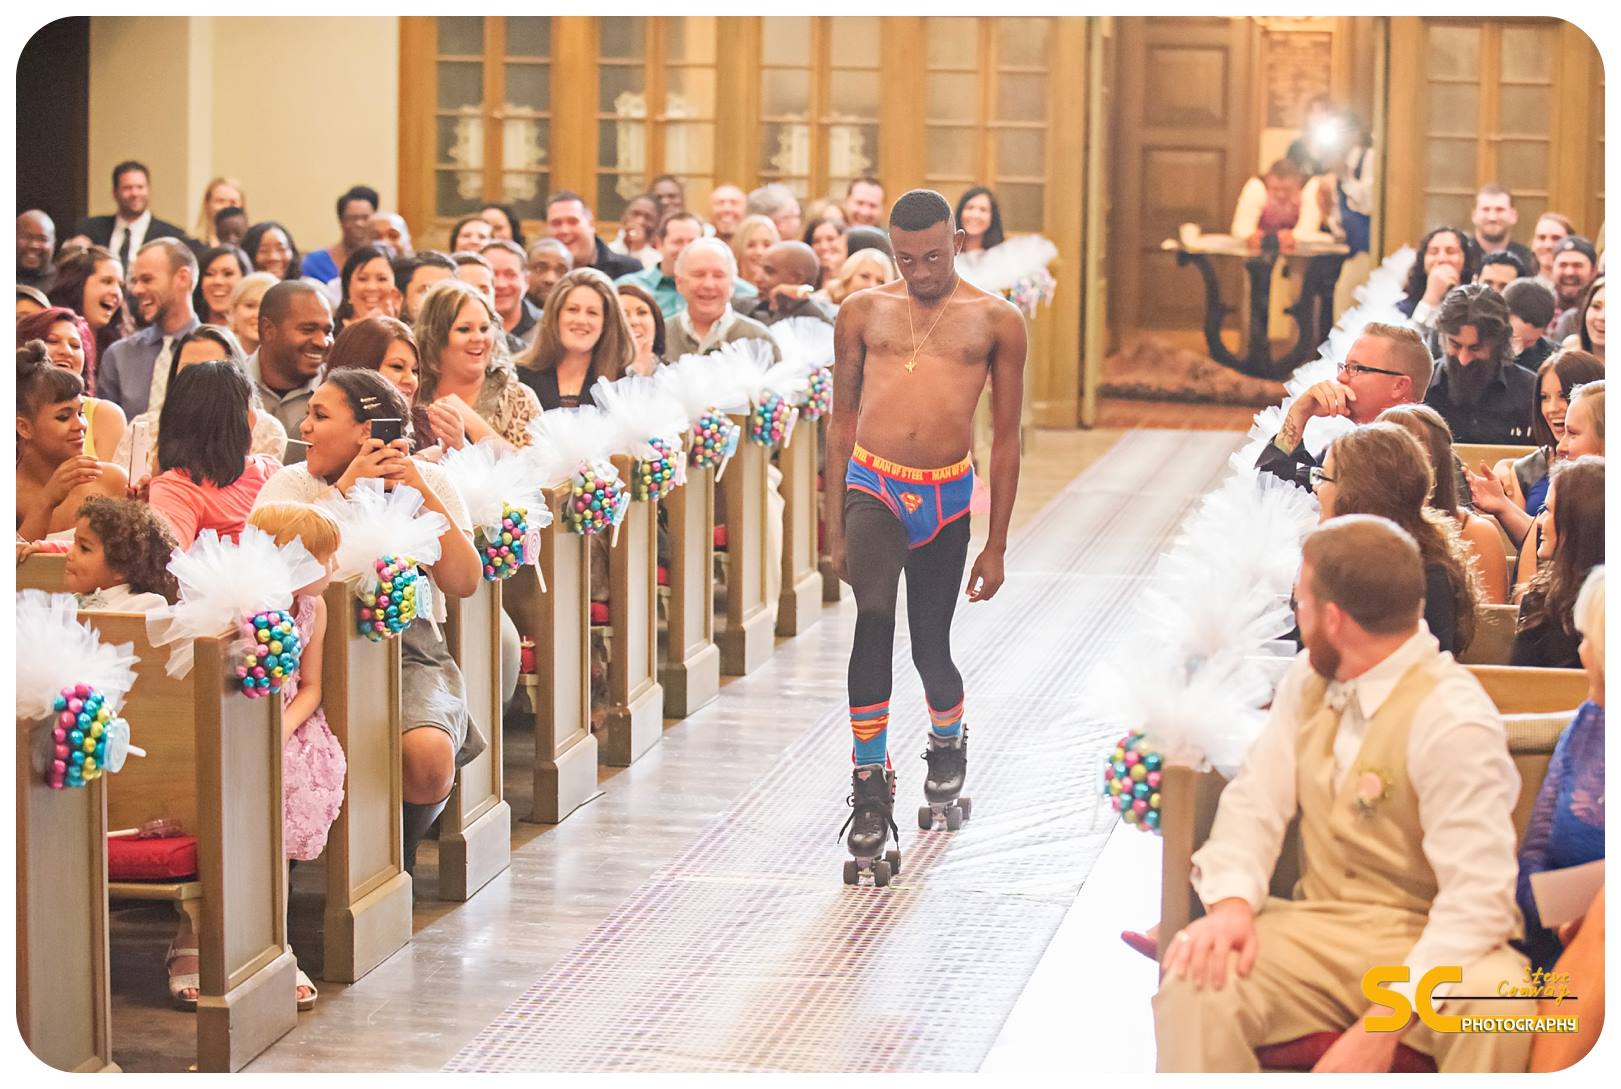 This Roller Skating Man Has Singlehandedly Elevated The Ring Bearer Game